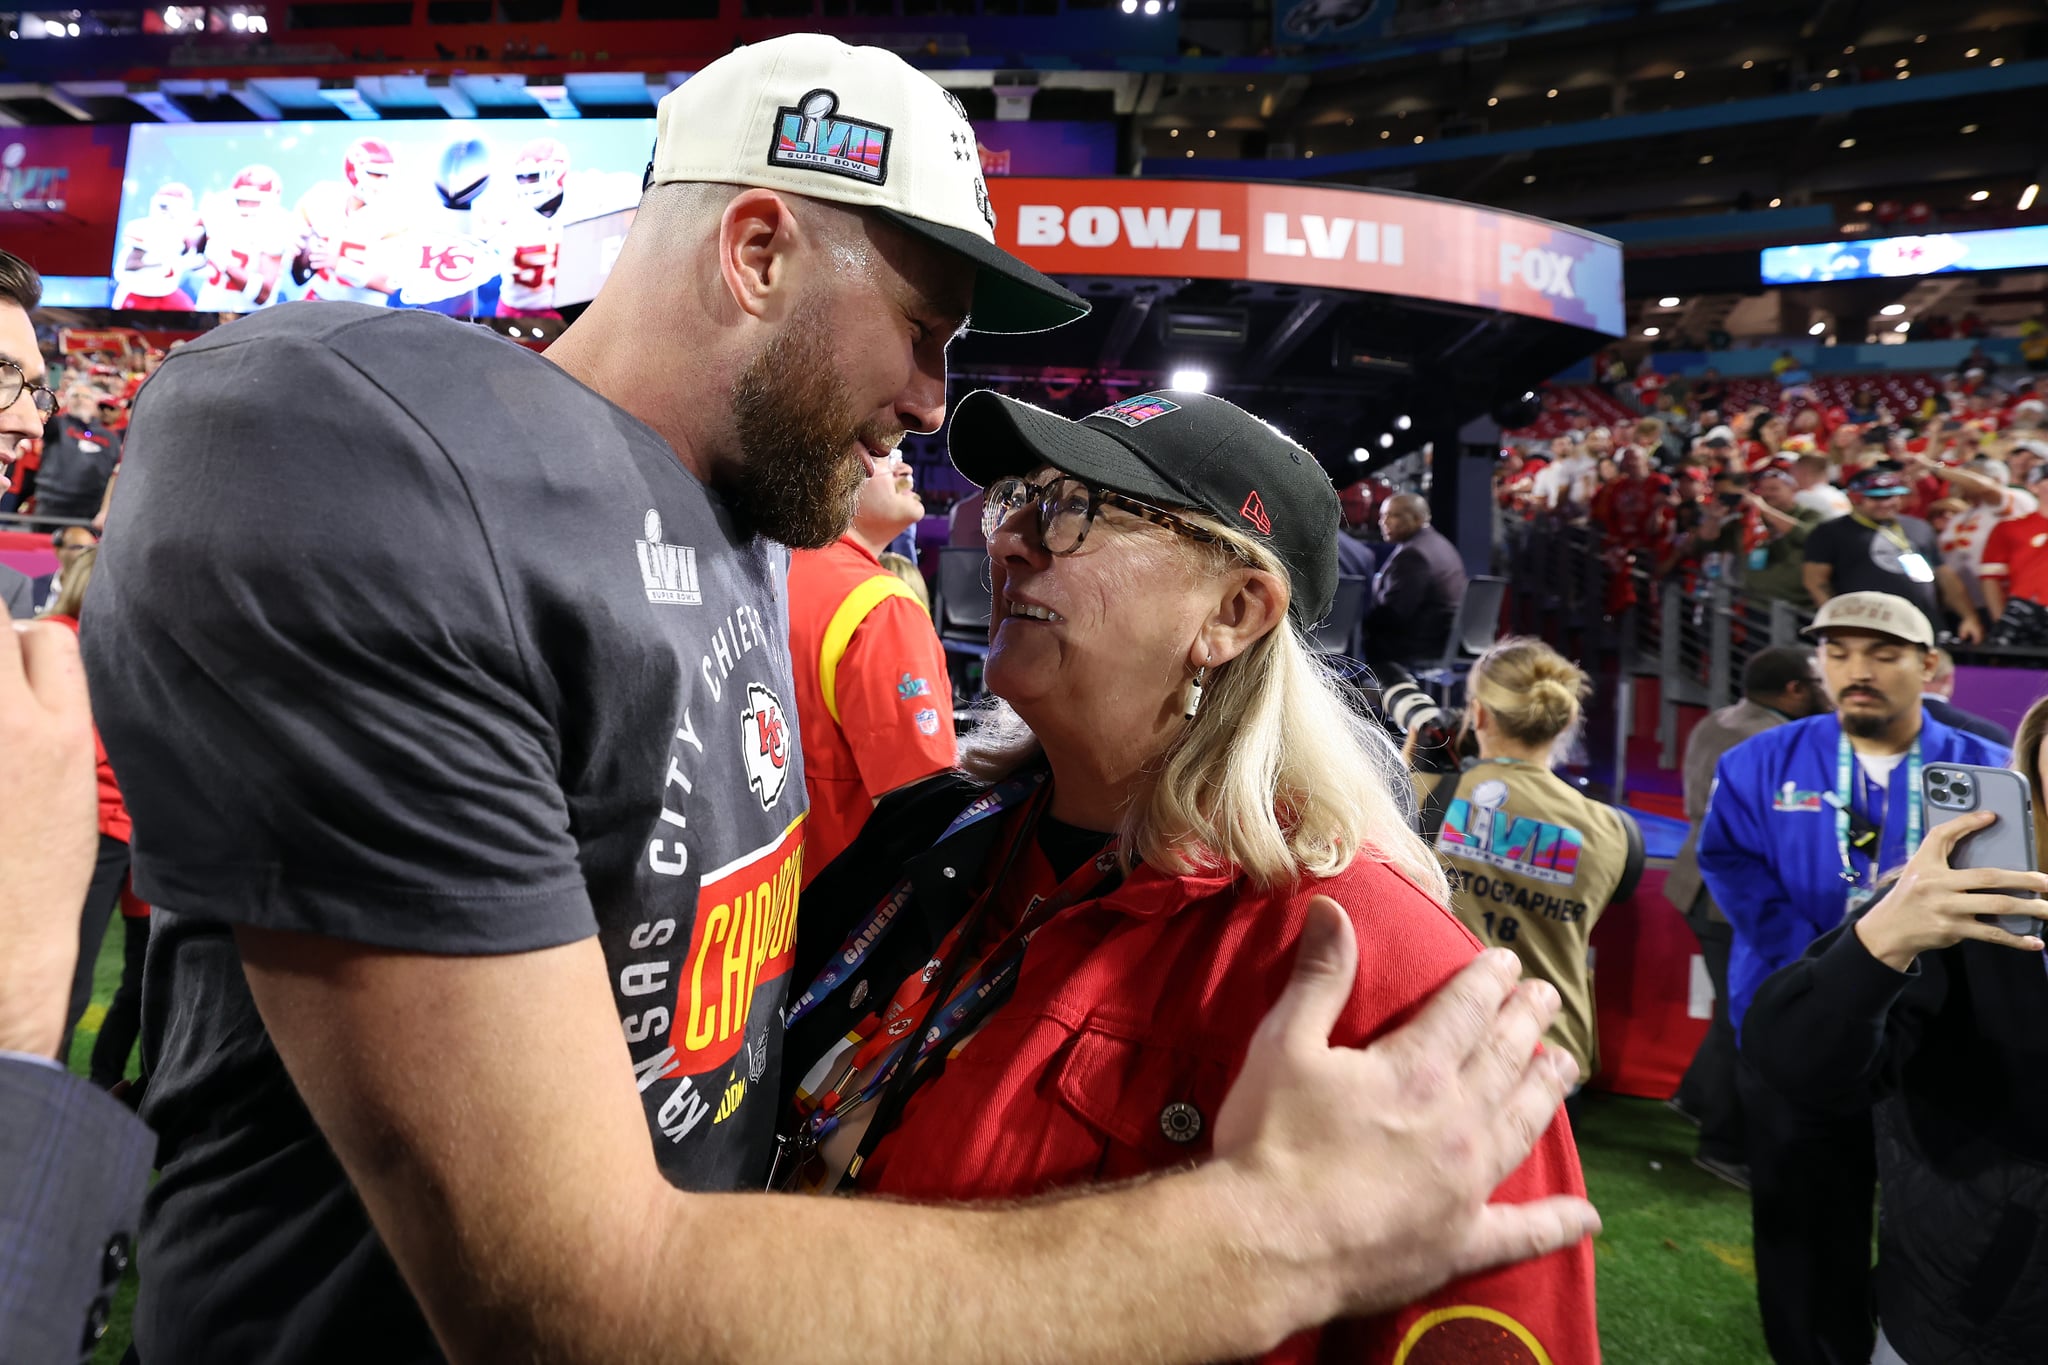 GLENDALE, ARIZONA - FEBRUARY 12: Travis Kelce #87 of the Kansas City Chiefs celebrates with Donna Kelce after defeating the Philadelphia Eagles 38-35 in Super Bowl LVII at State Farm Stadium on February 12, 2023 in Glendale, Arizona. (Photo by Christian Petersen/Getty Images)